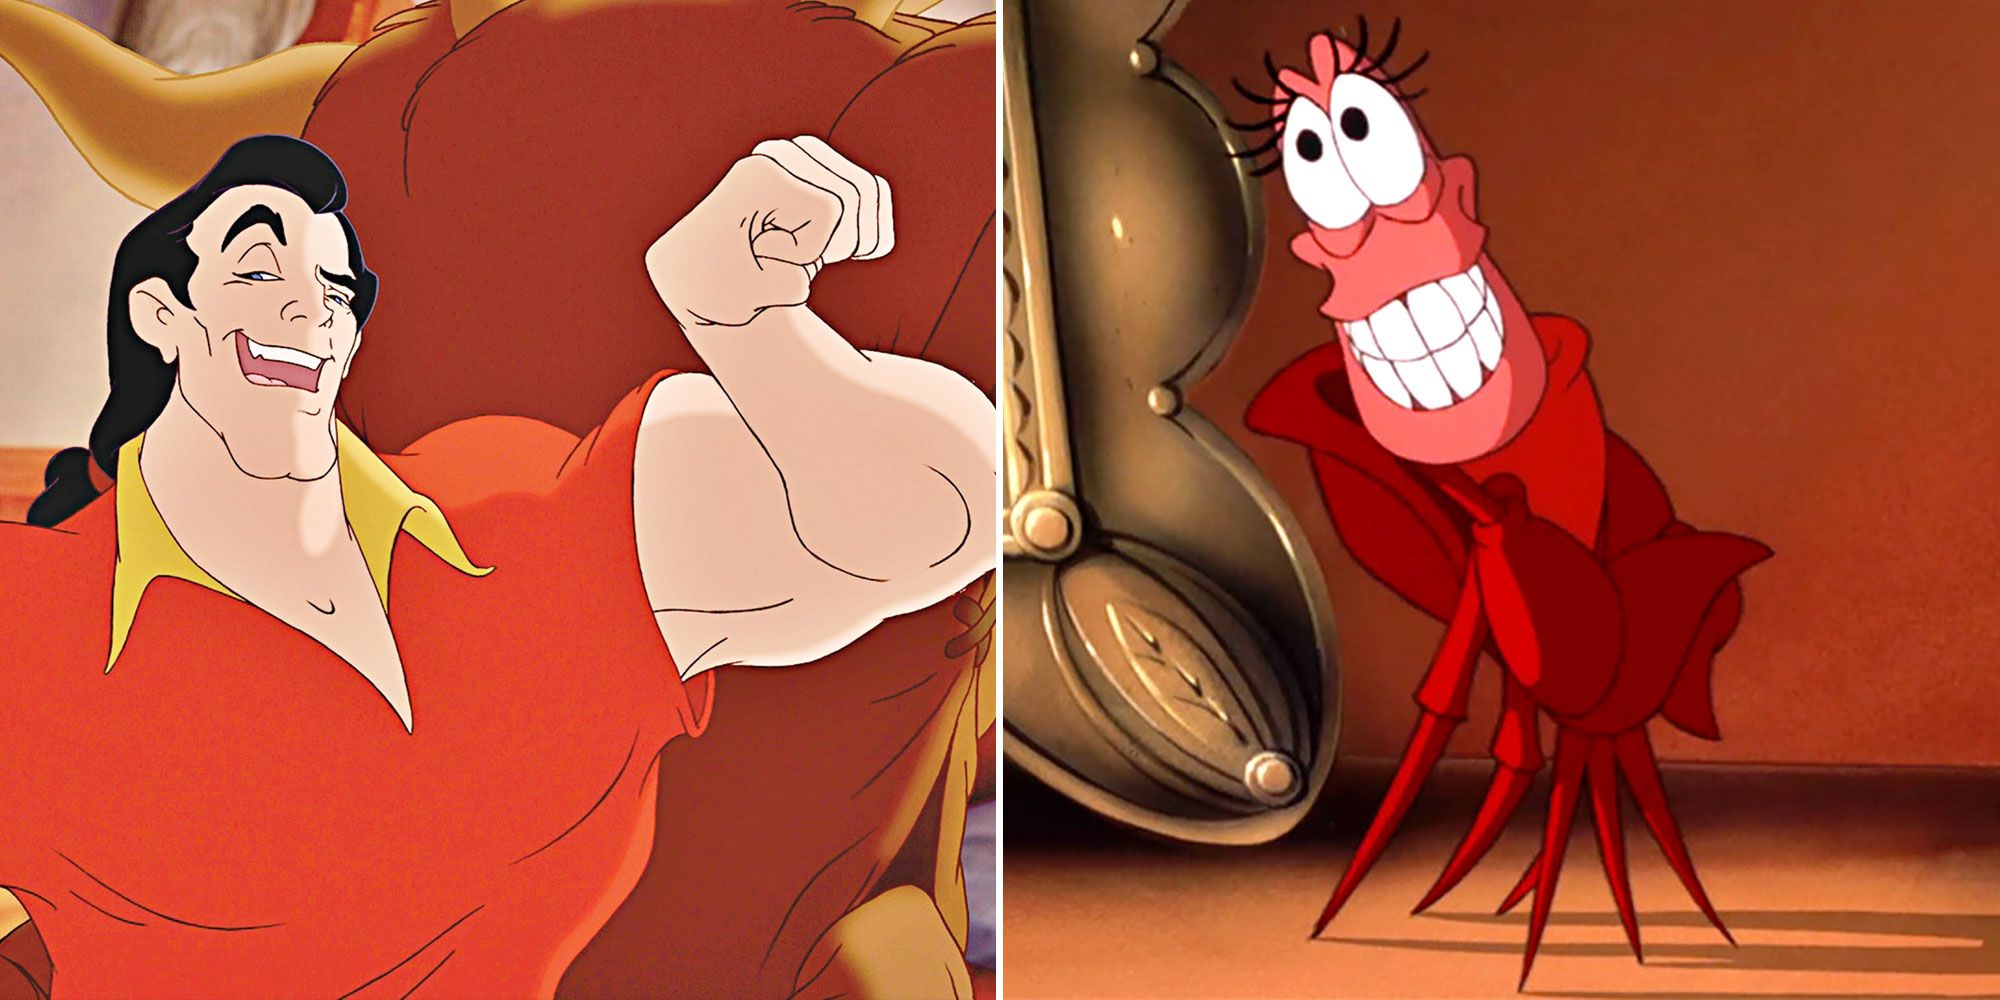 Disney's Best Gay Role Models - Disney Characters Who Could be Gay